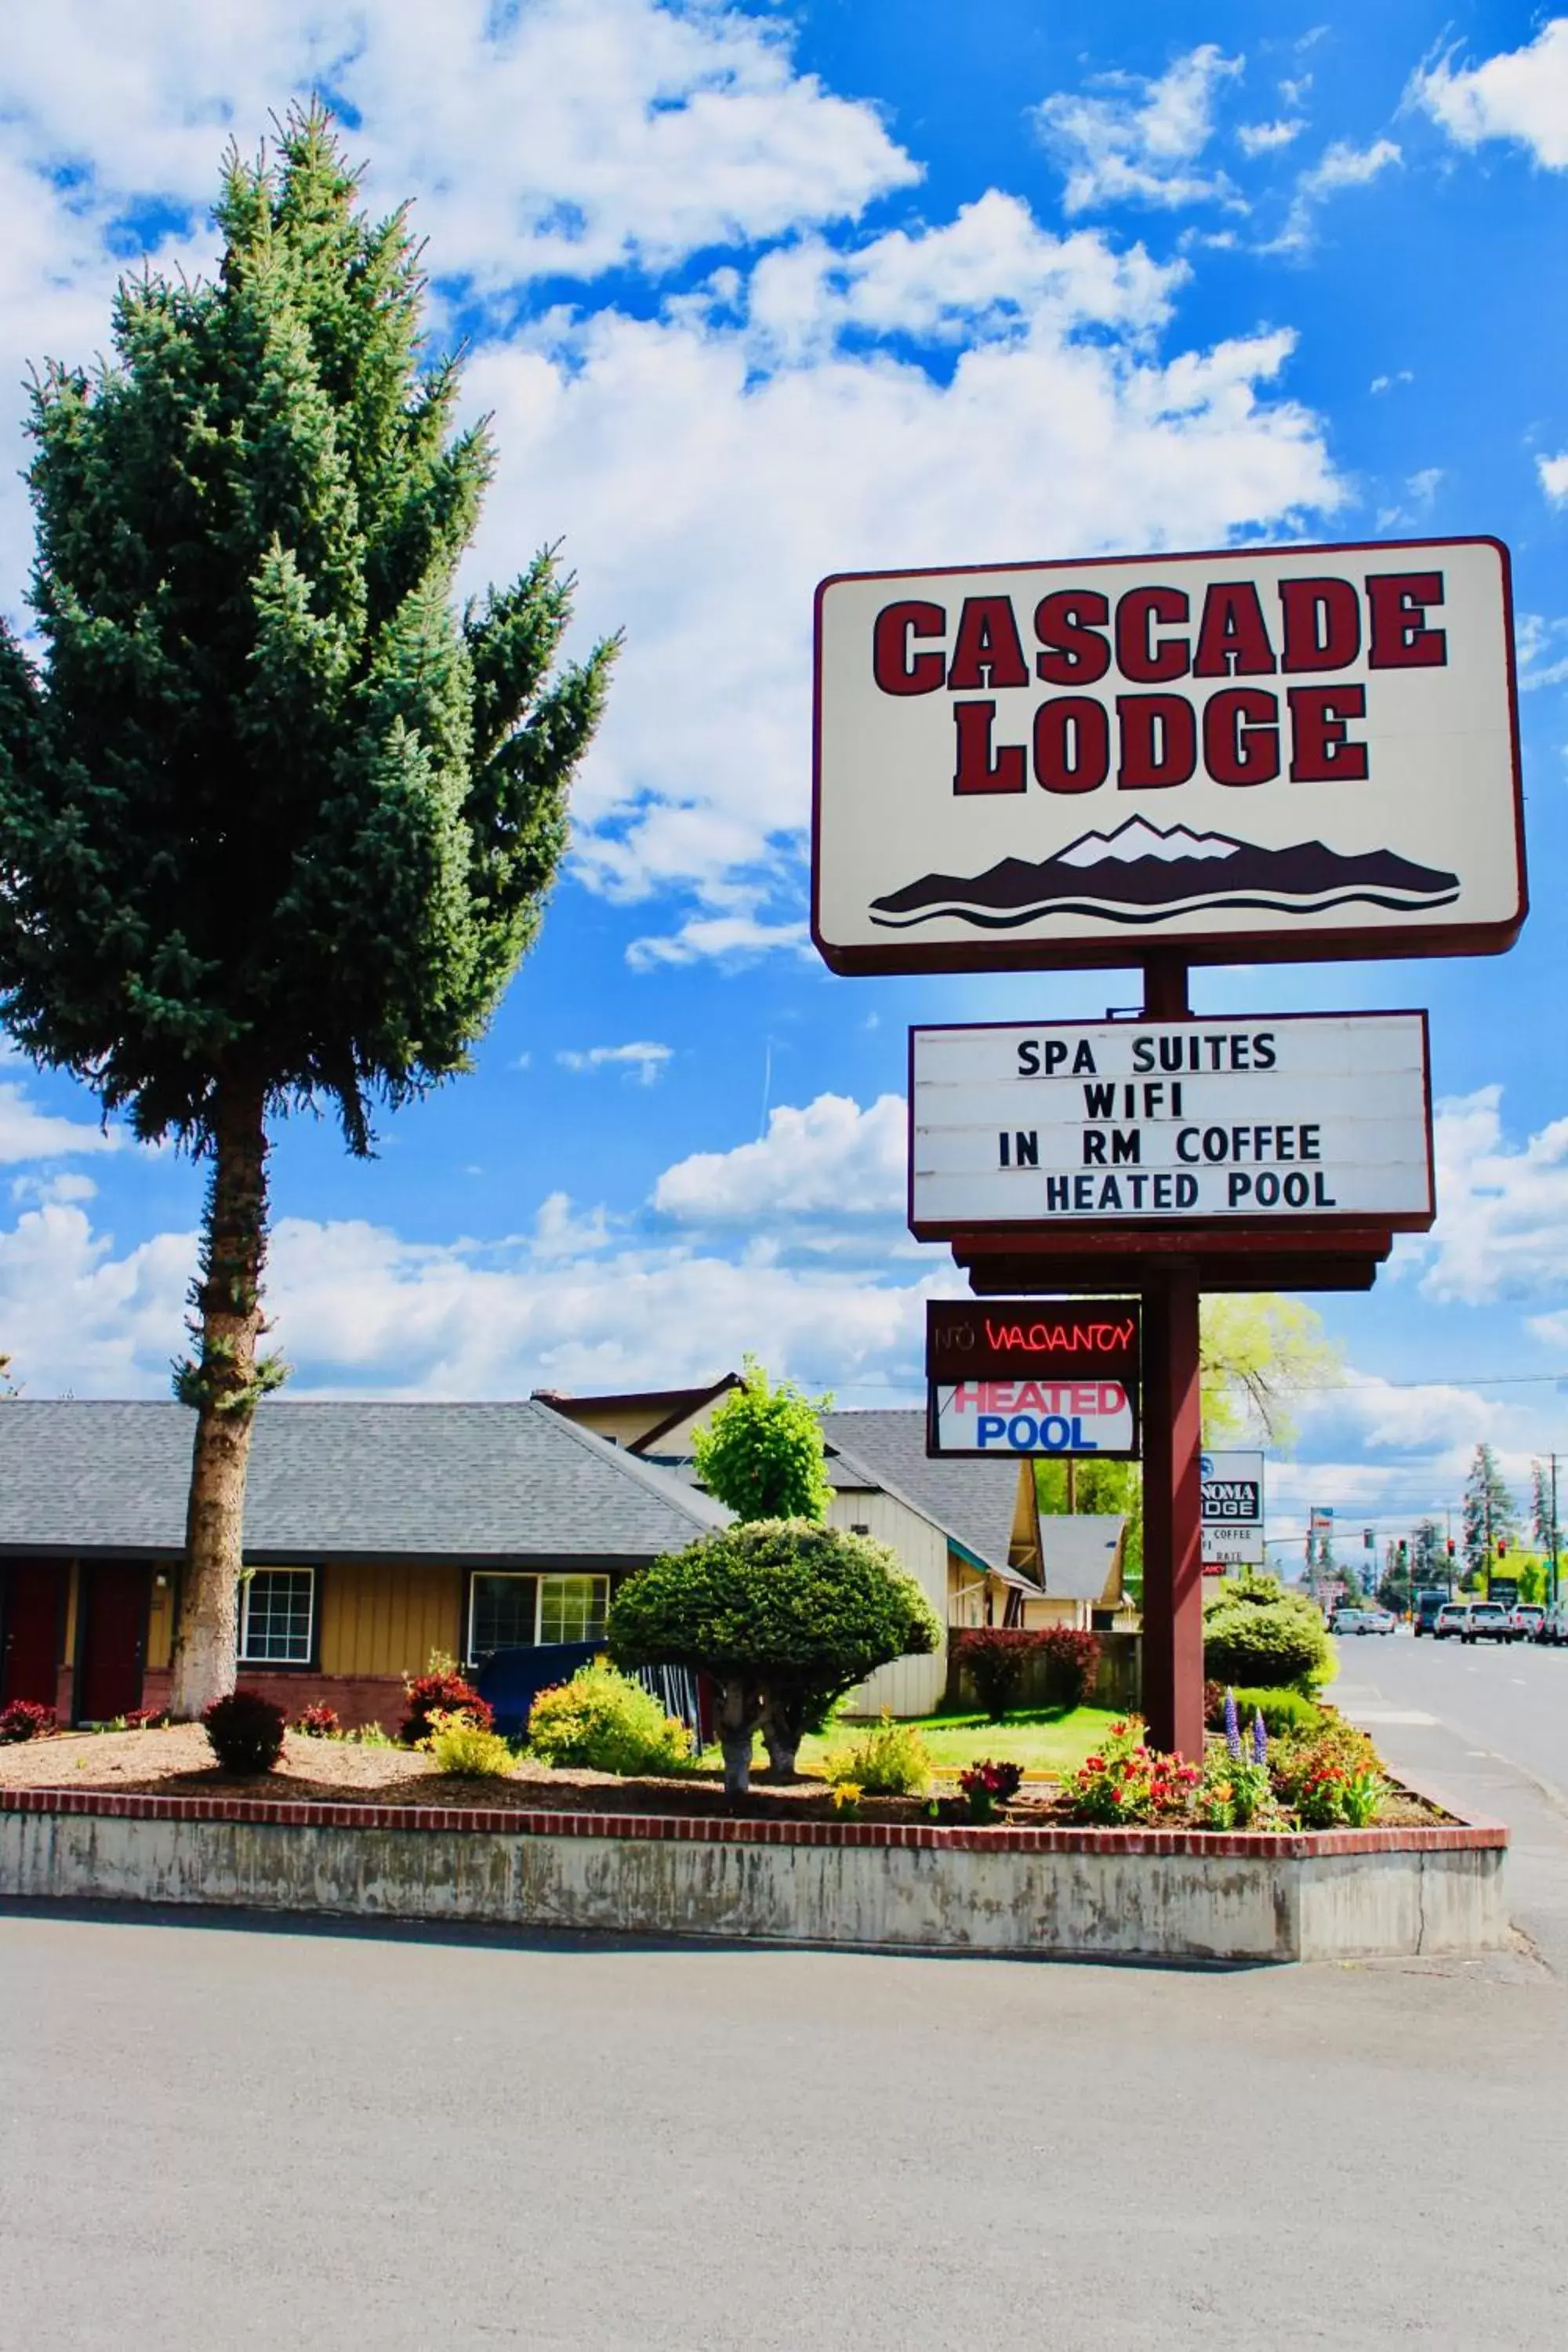 Property logo or sign in Cascade Lodge